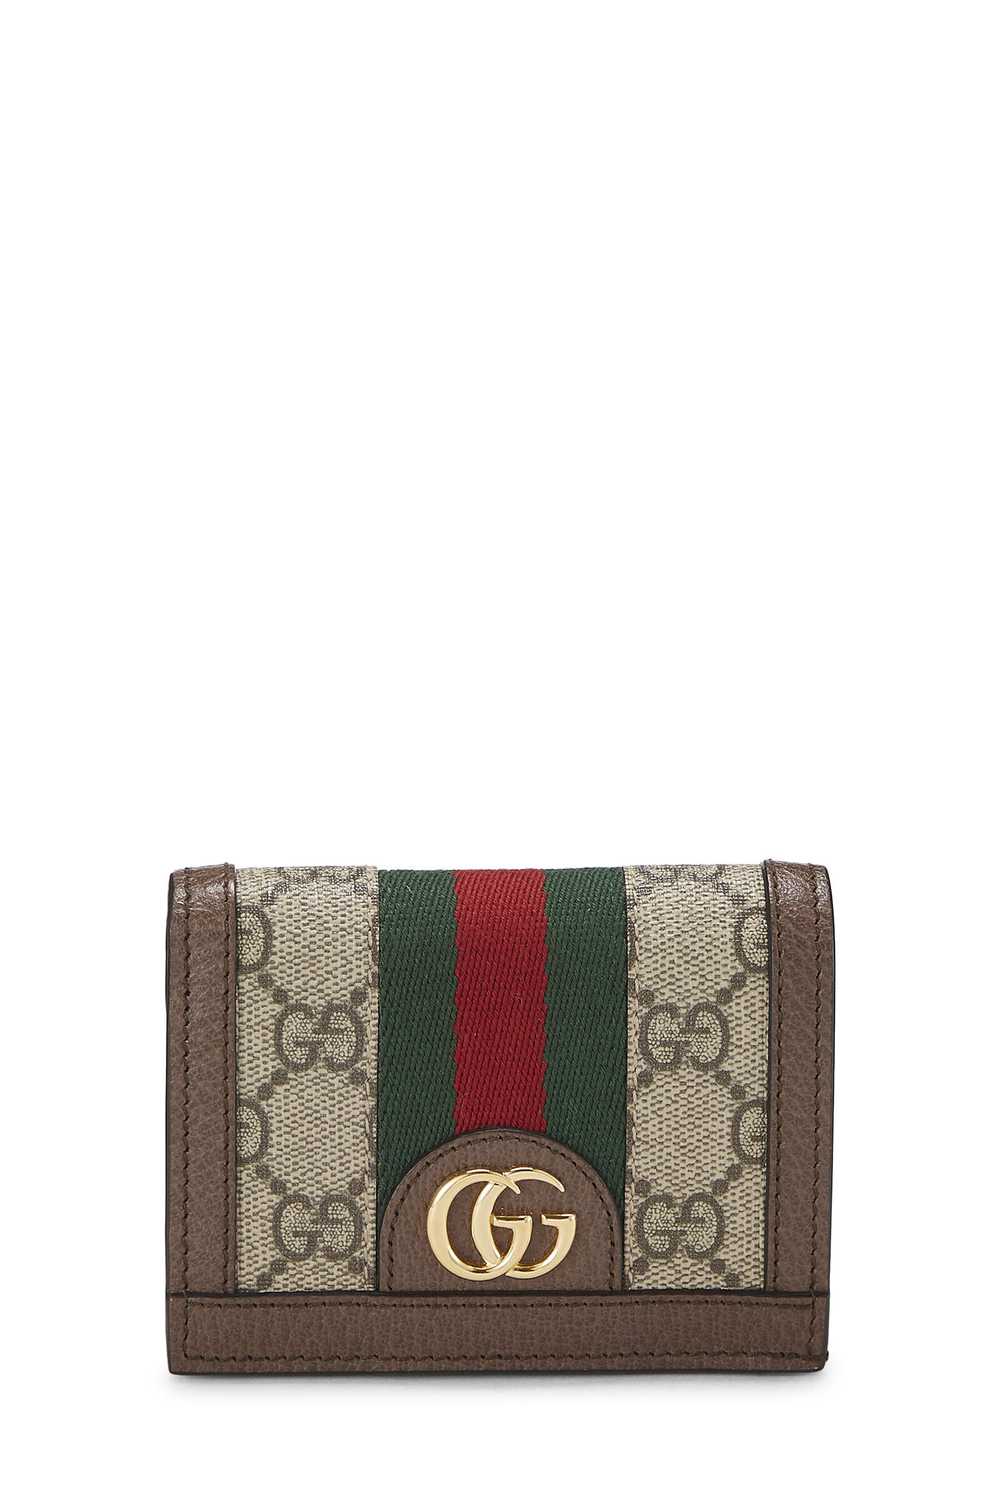 Original GG Supreme Canvas Ophidia French Wallet - image 1